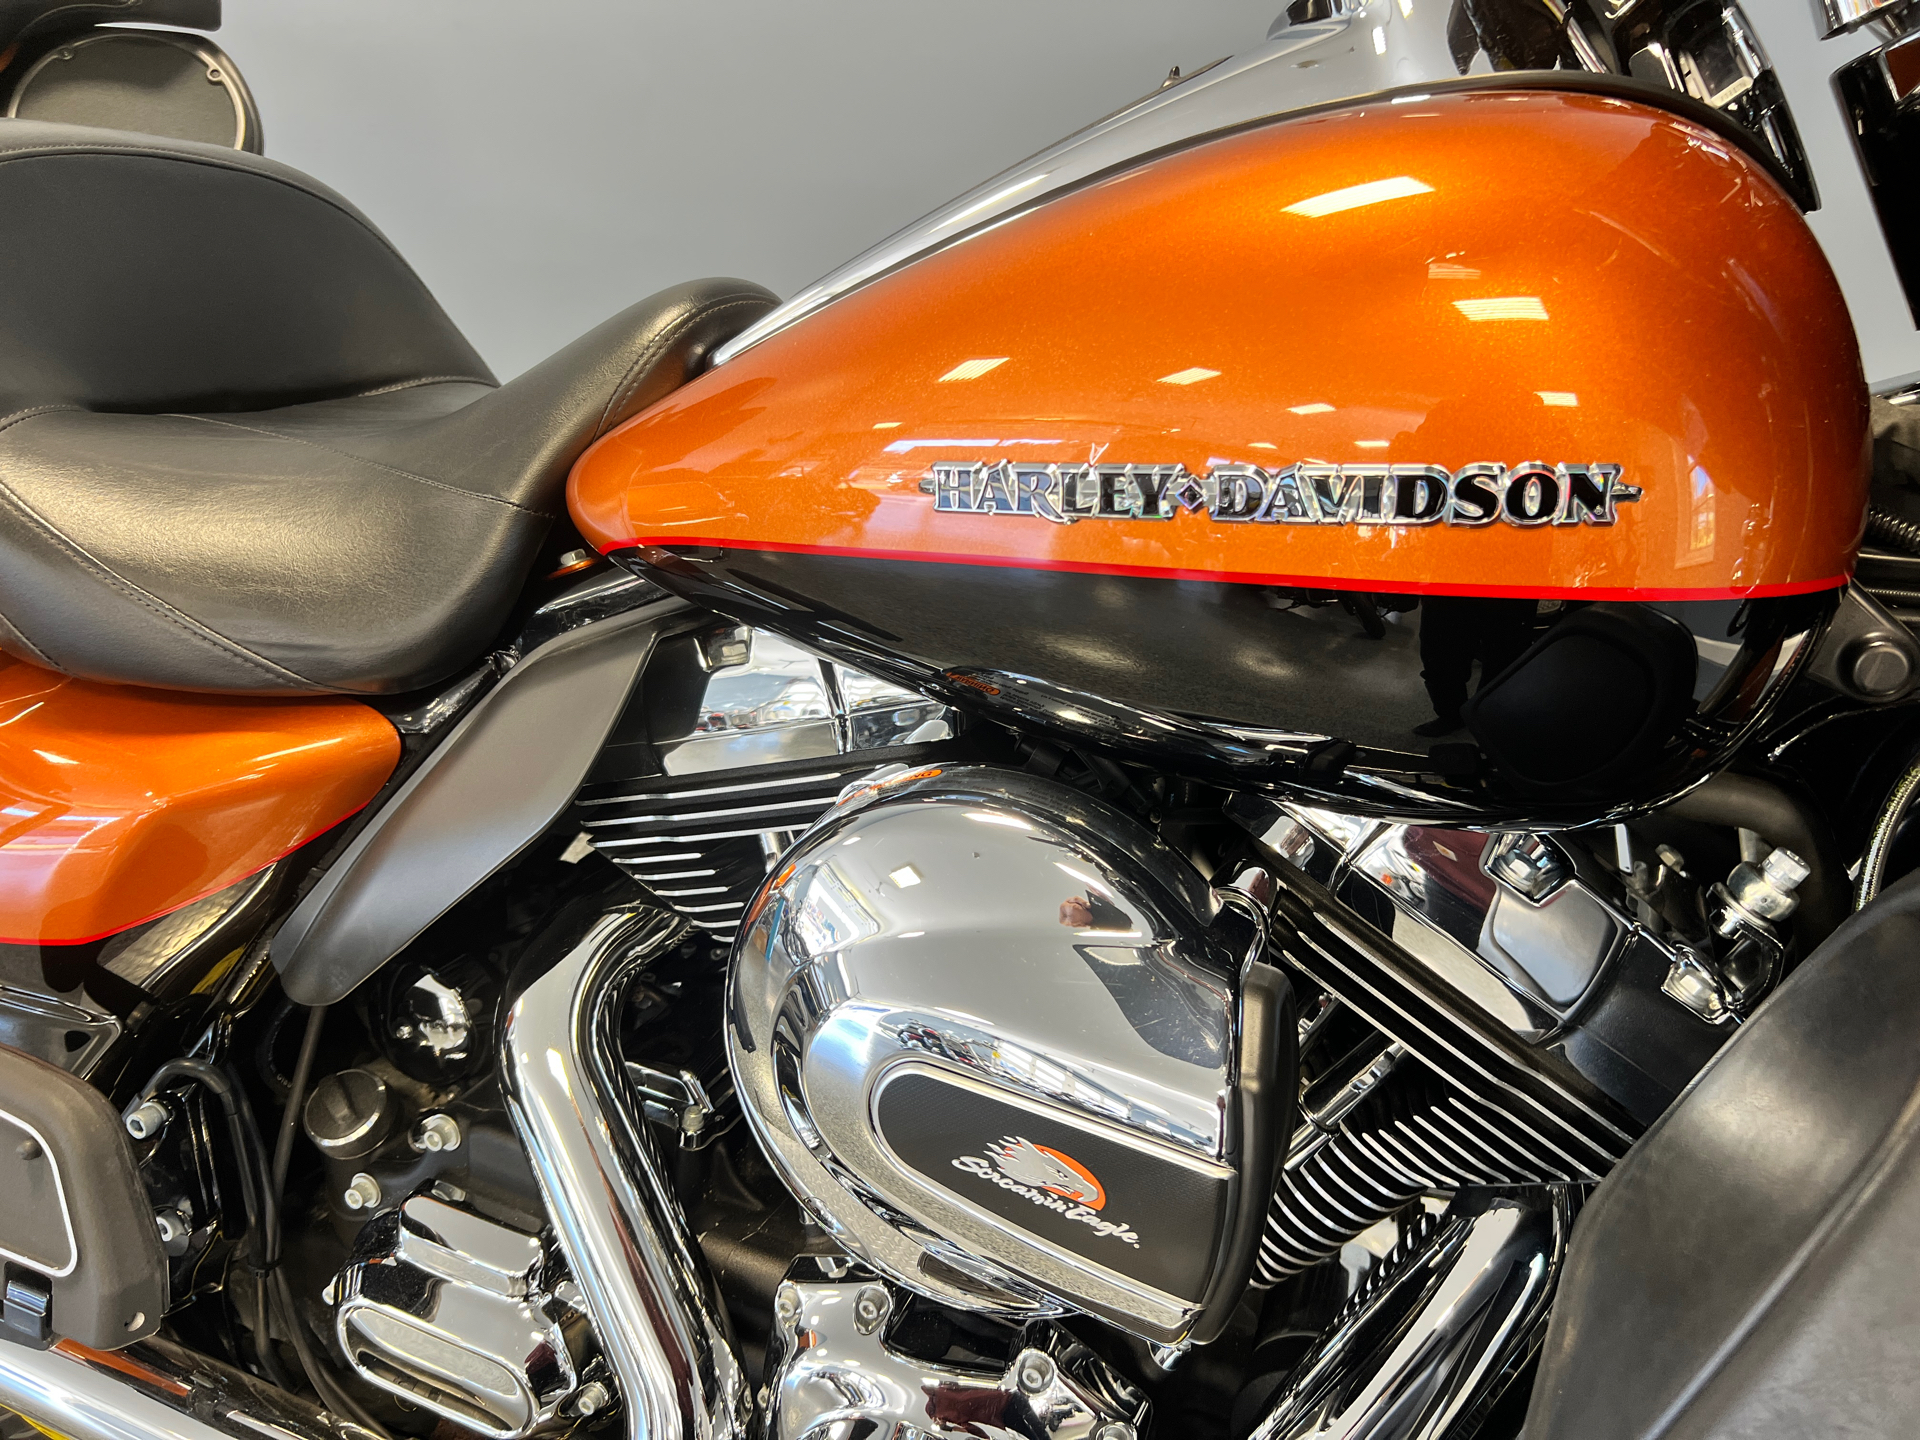 2016 Harley-Davidson Ultra Limited in Meredith, New Hampshire - Photo 2